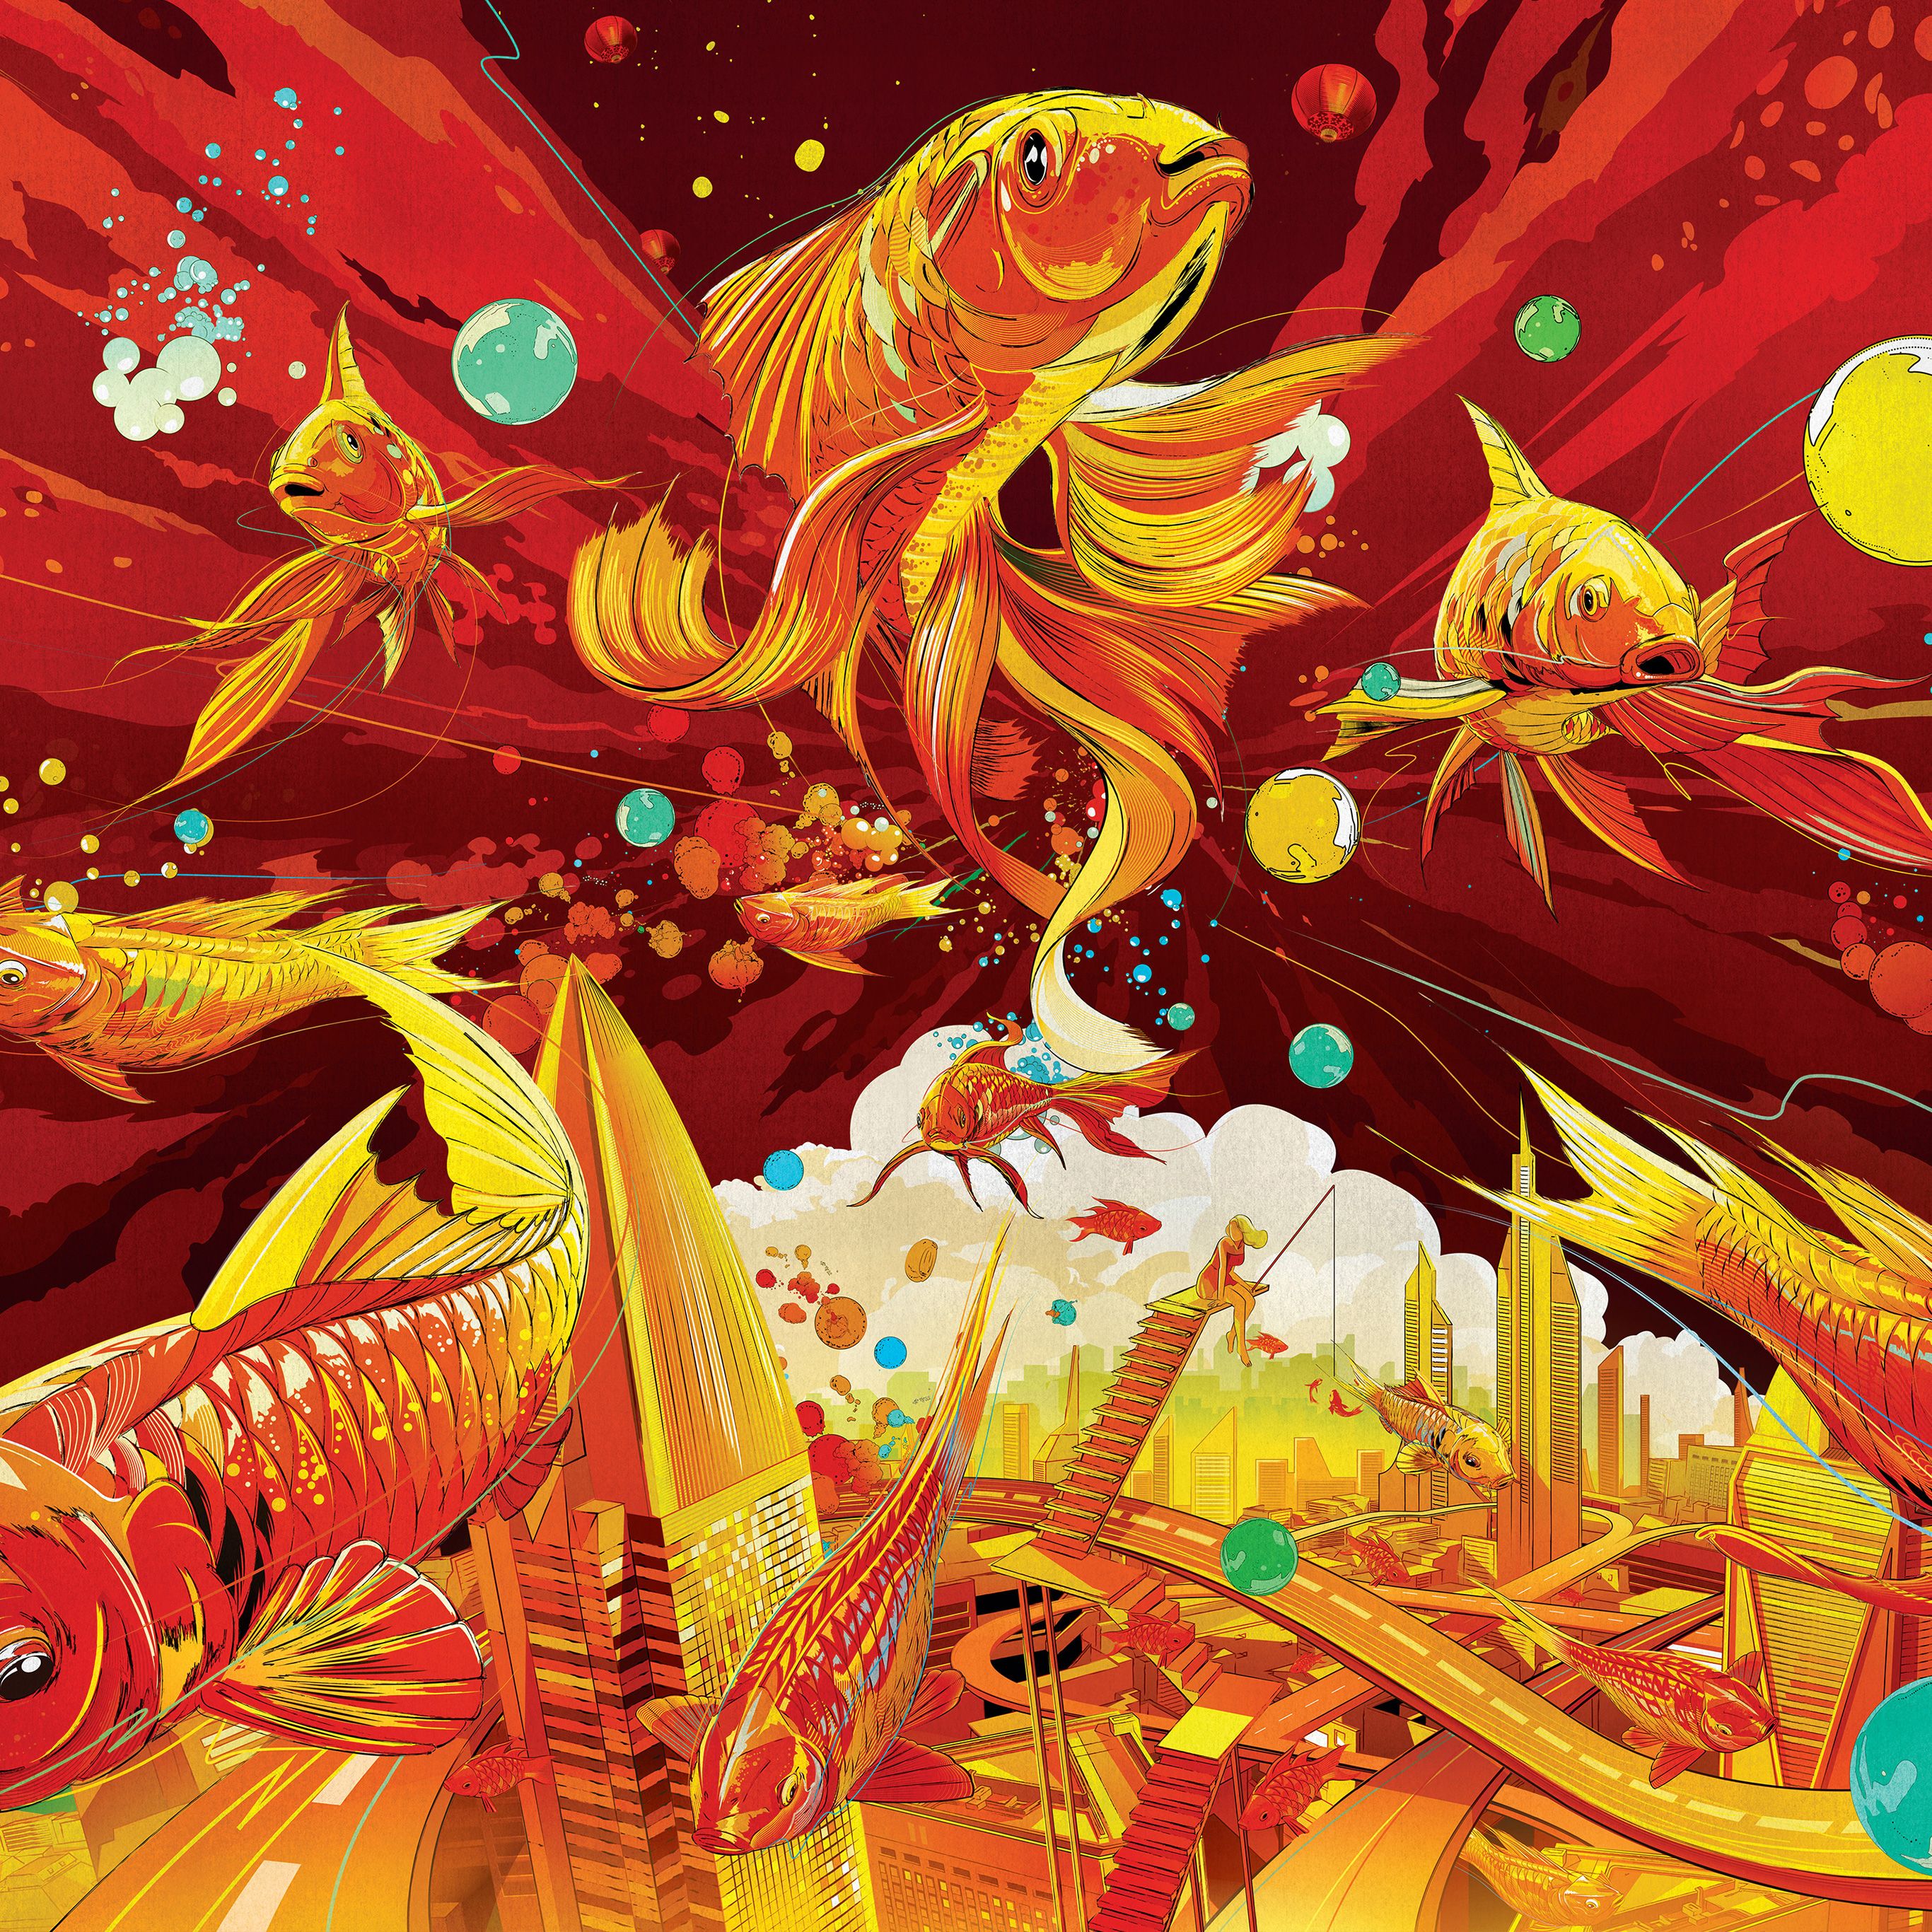 Apple Releases Gorgeous Chinese New Year Themed Artist Drawn Wallpaper